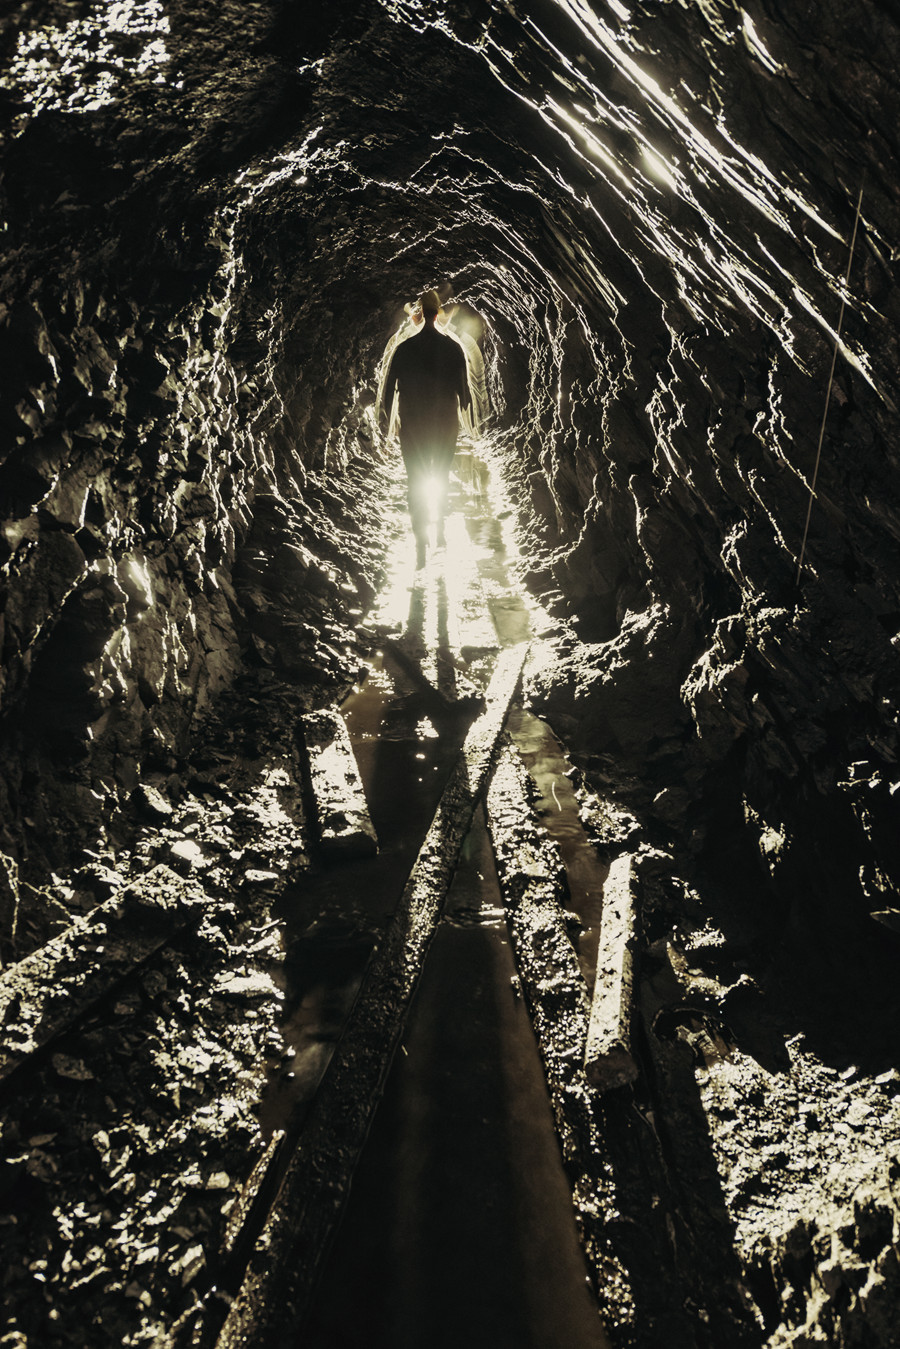 A gold miner is silhouetted in the narrow shaft of an abandoned gold mine in Colombia.